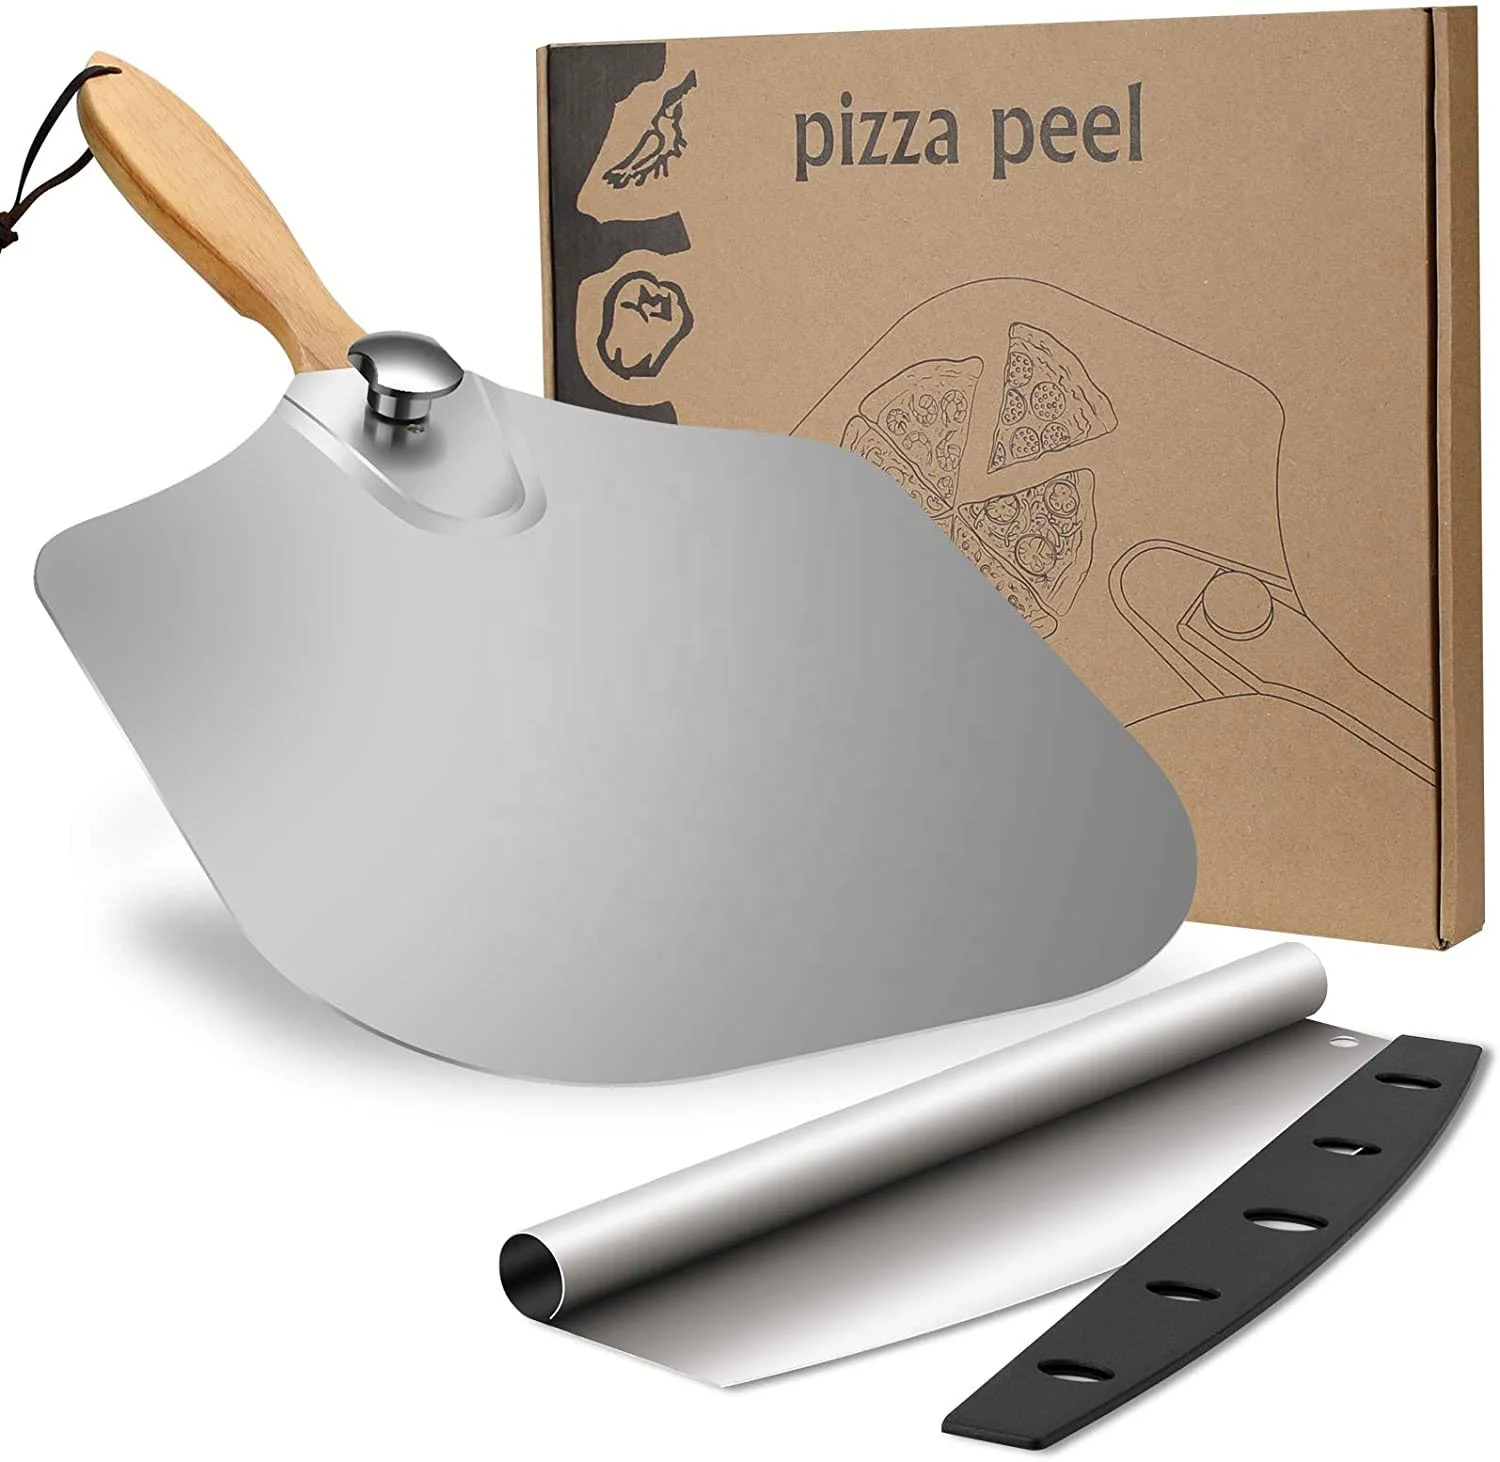 12 x 14 Inch Foldable Aluminum Pizza Peel Shovel with 14 Inch Cutter Rocker Pizza Tool Set For Homemade Baking Lovers